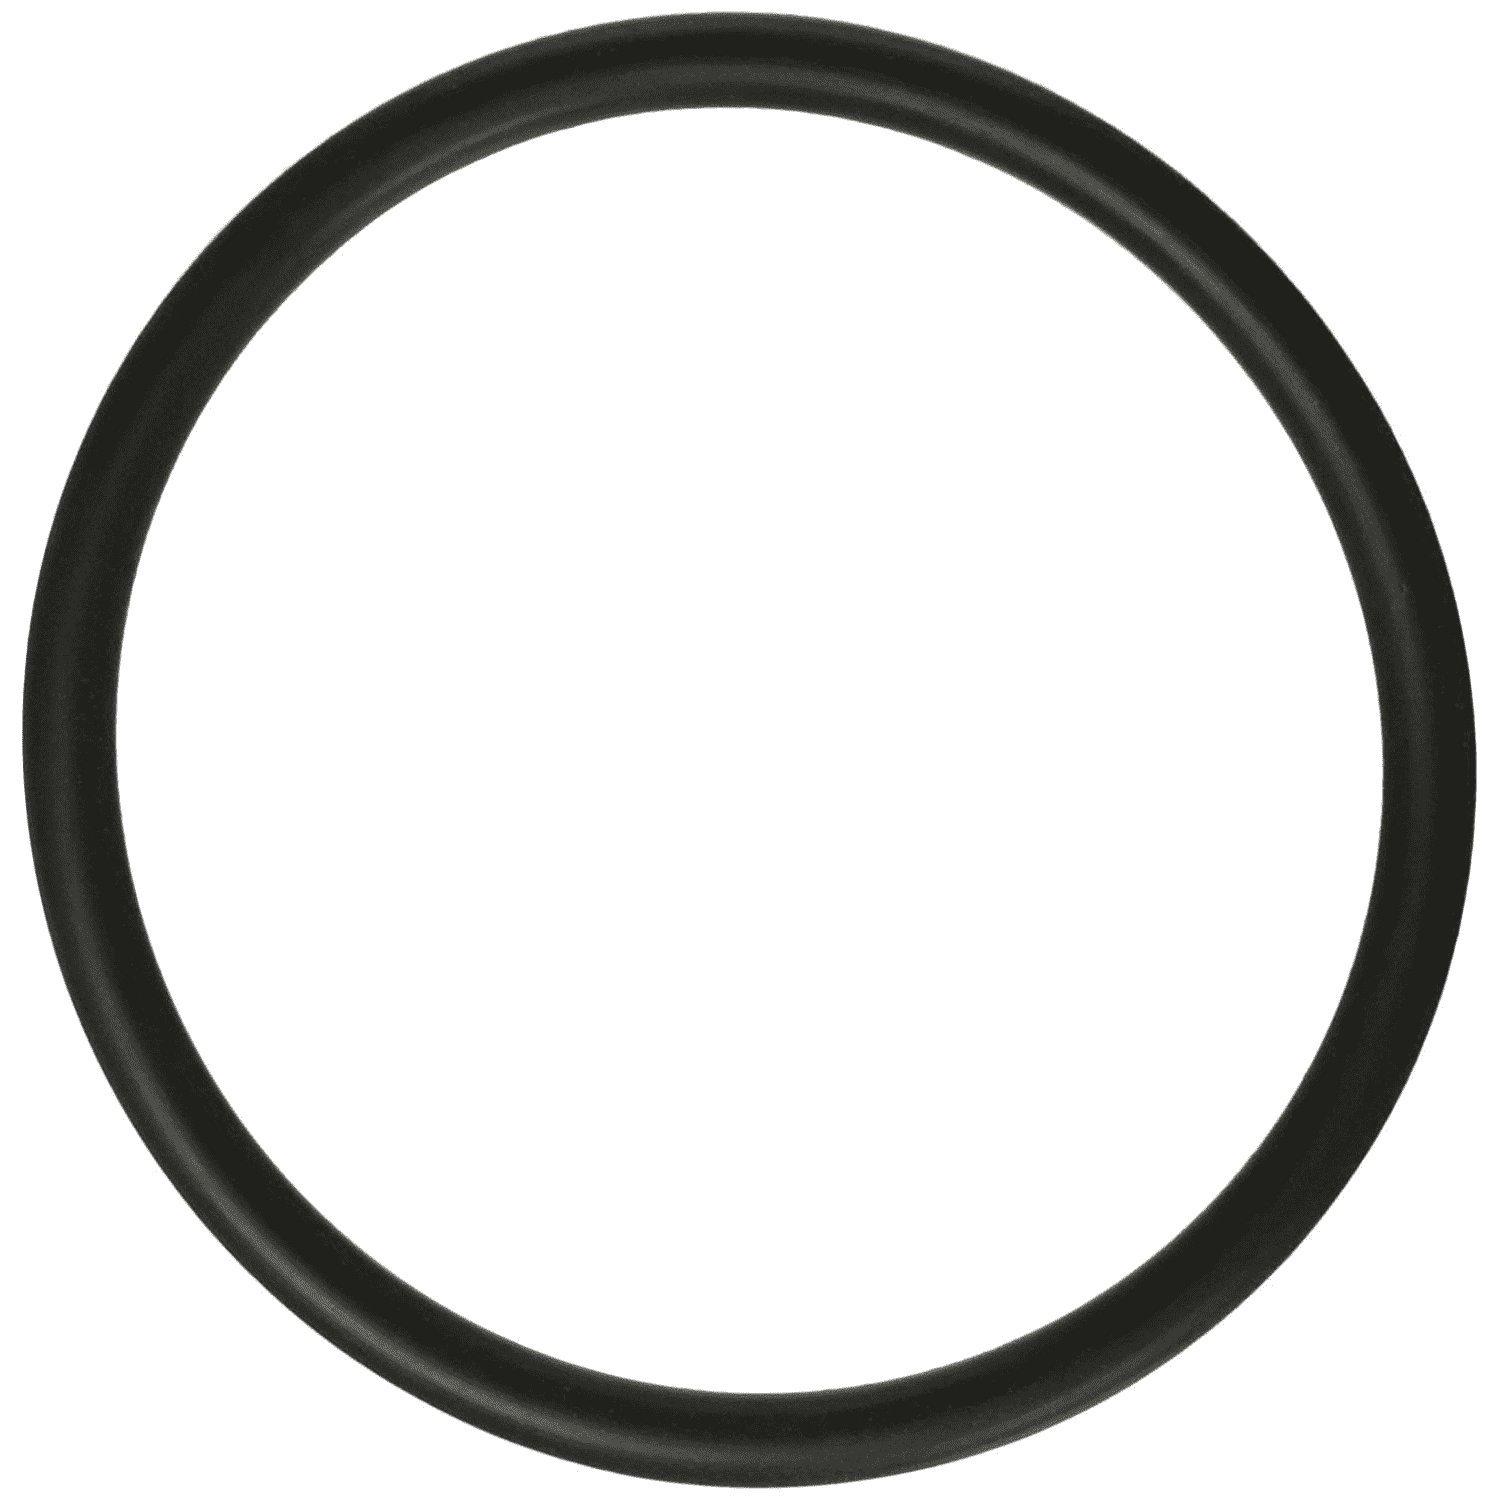 All Seals - Replacement Filter Bulkhead O-Ring, 2.725in. ID